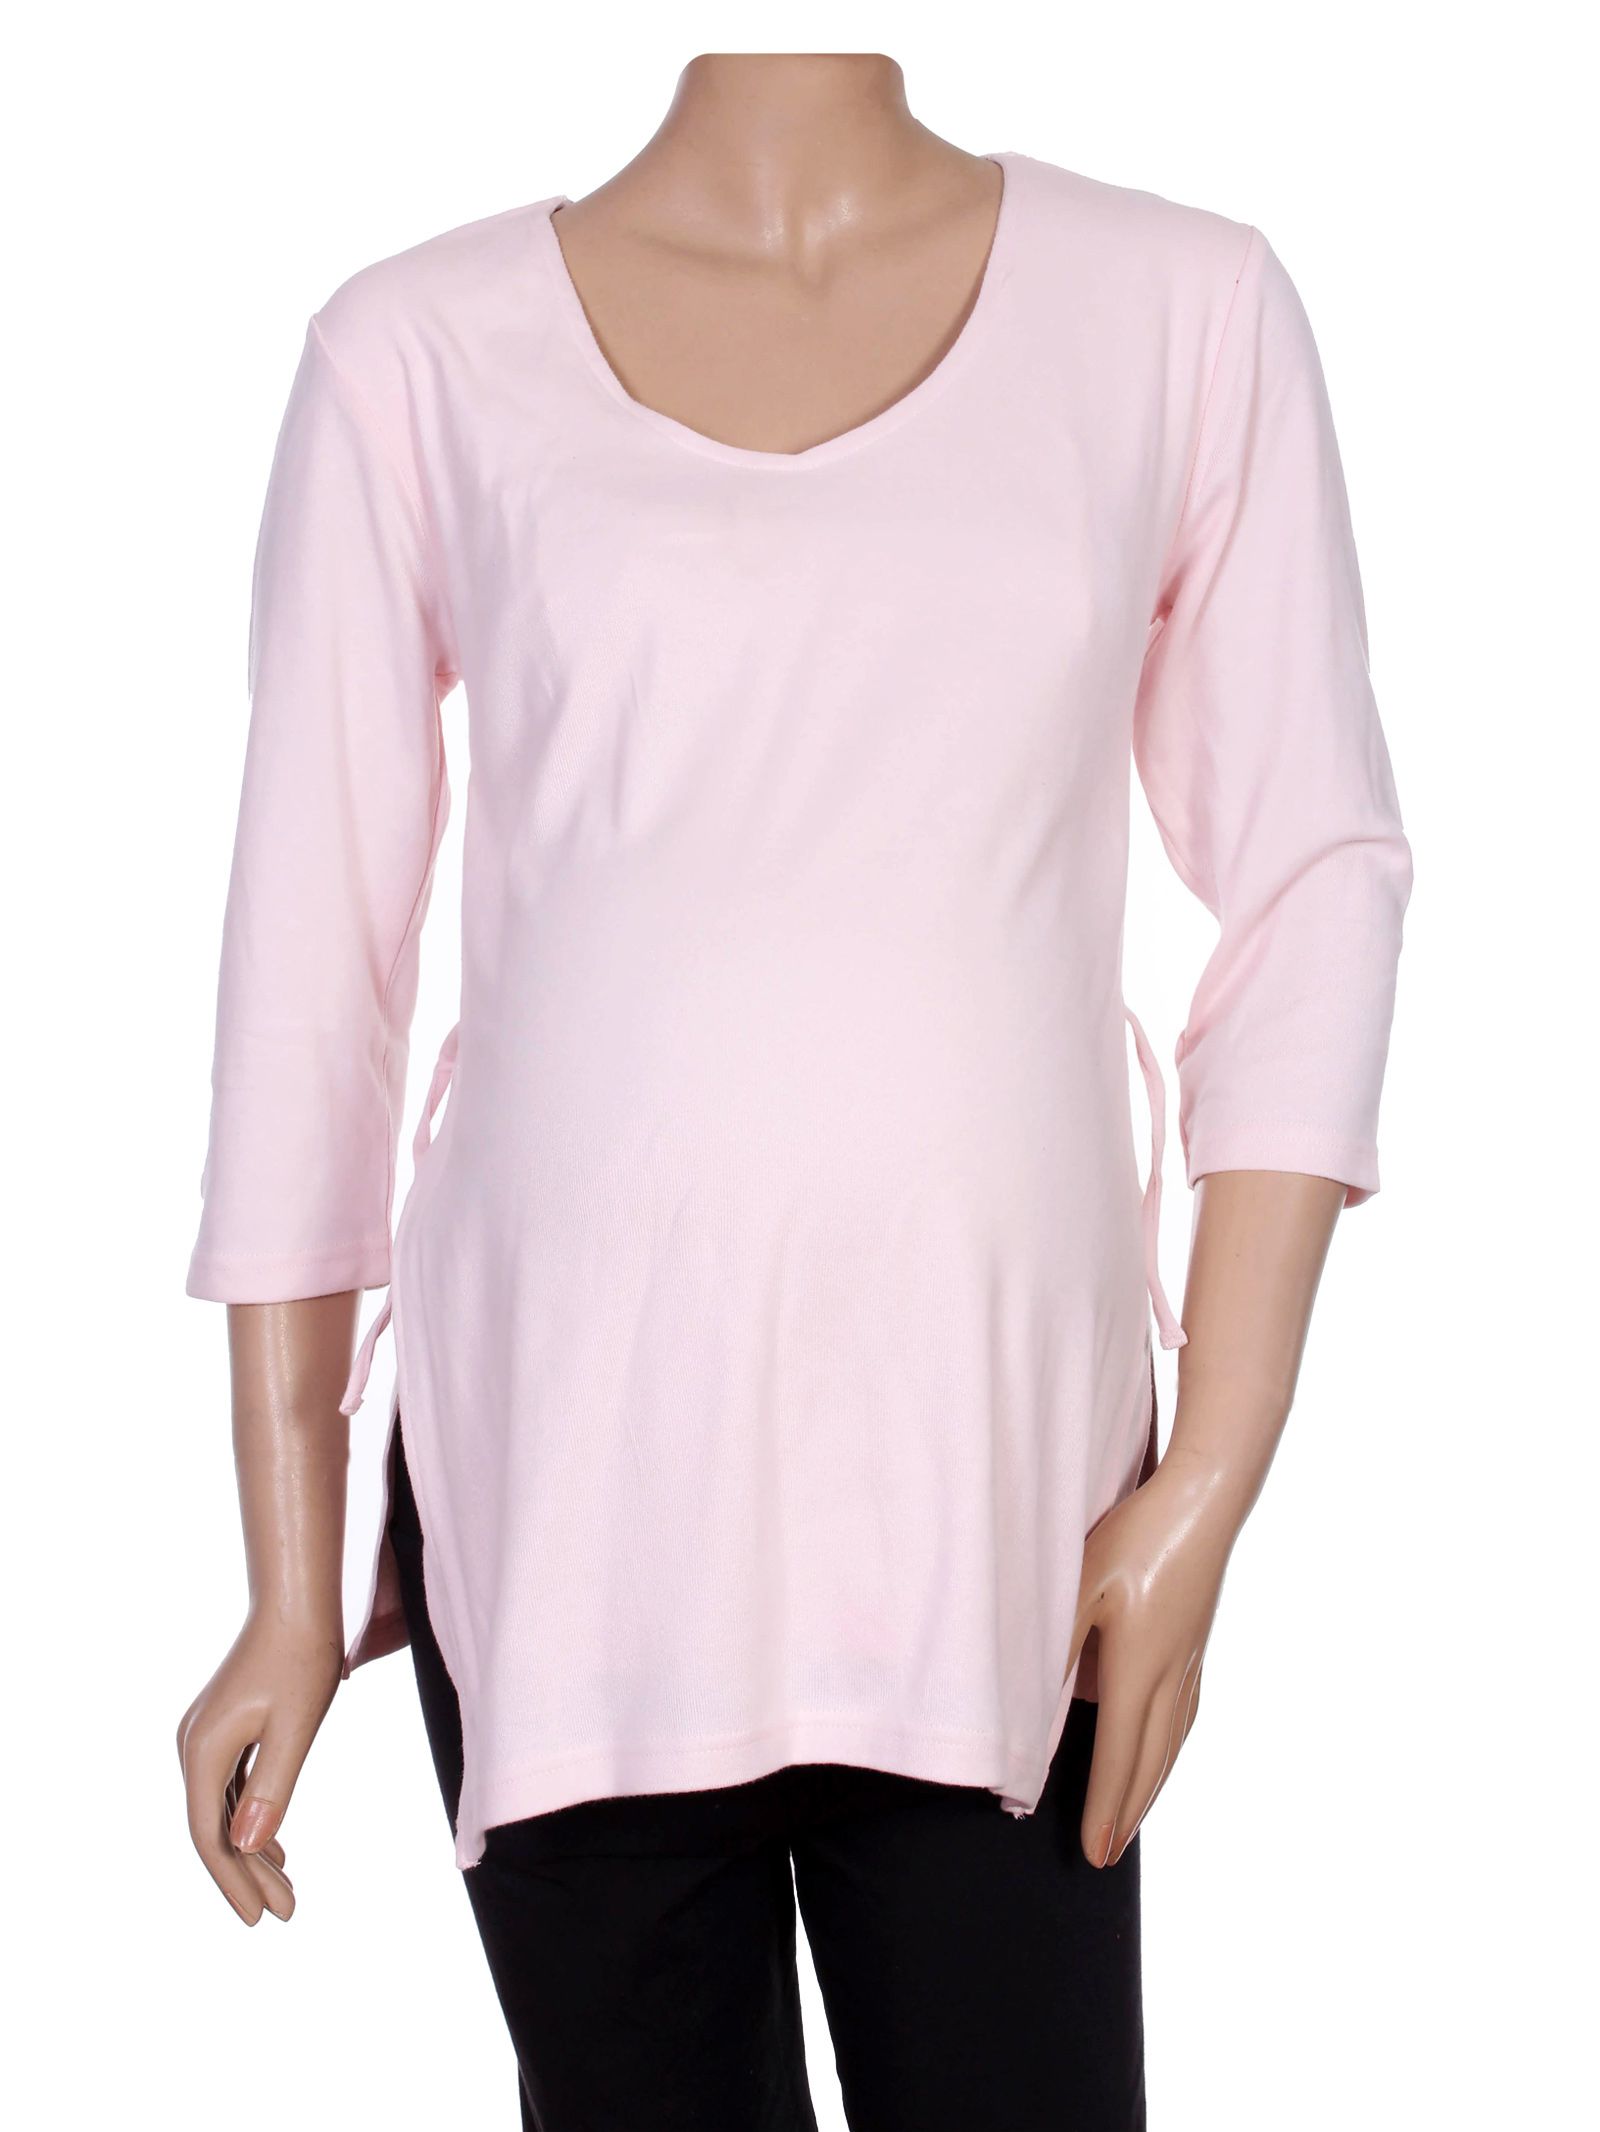 Maternity Top - Pink